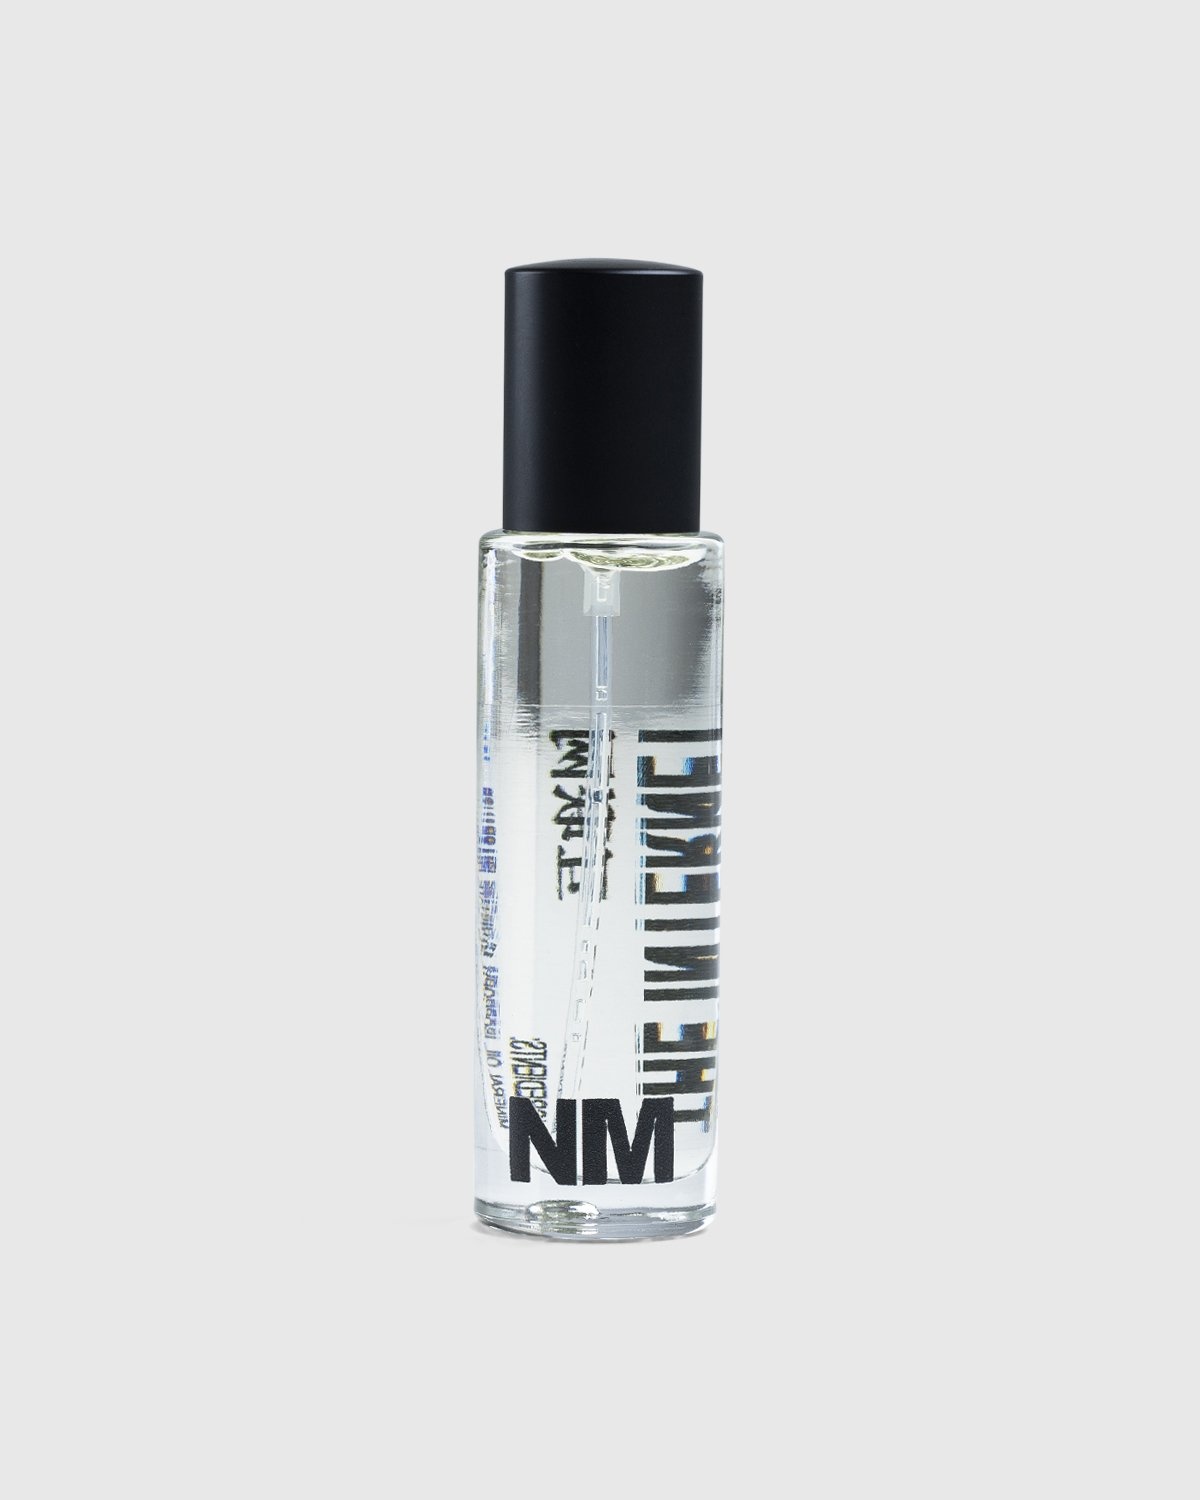 New Models x The Society of Scent x Highsnobiety – Scent of The Internet - Cosmetics - Image 2